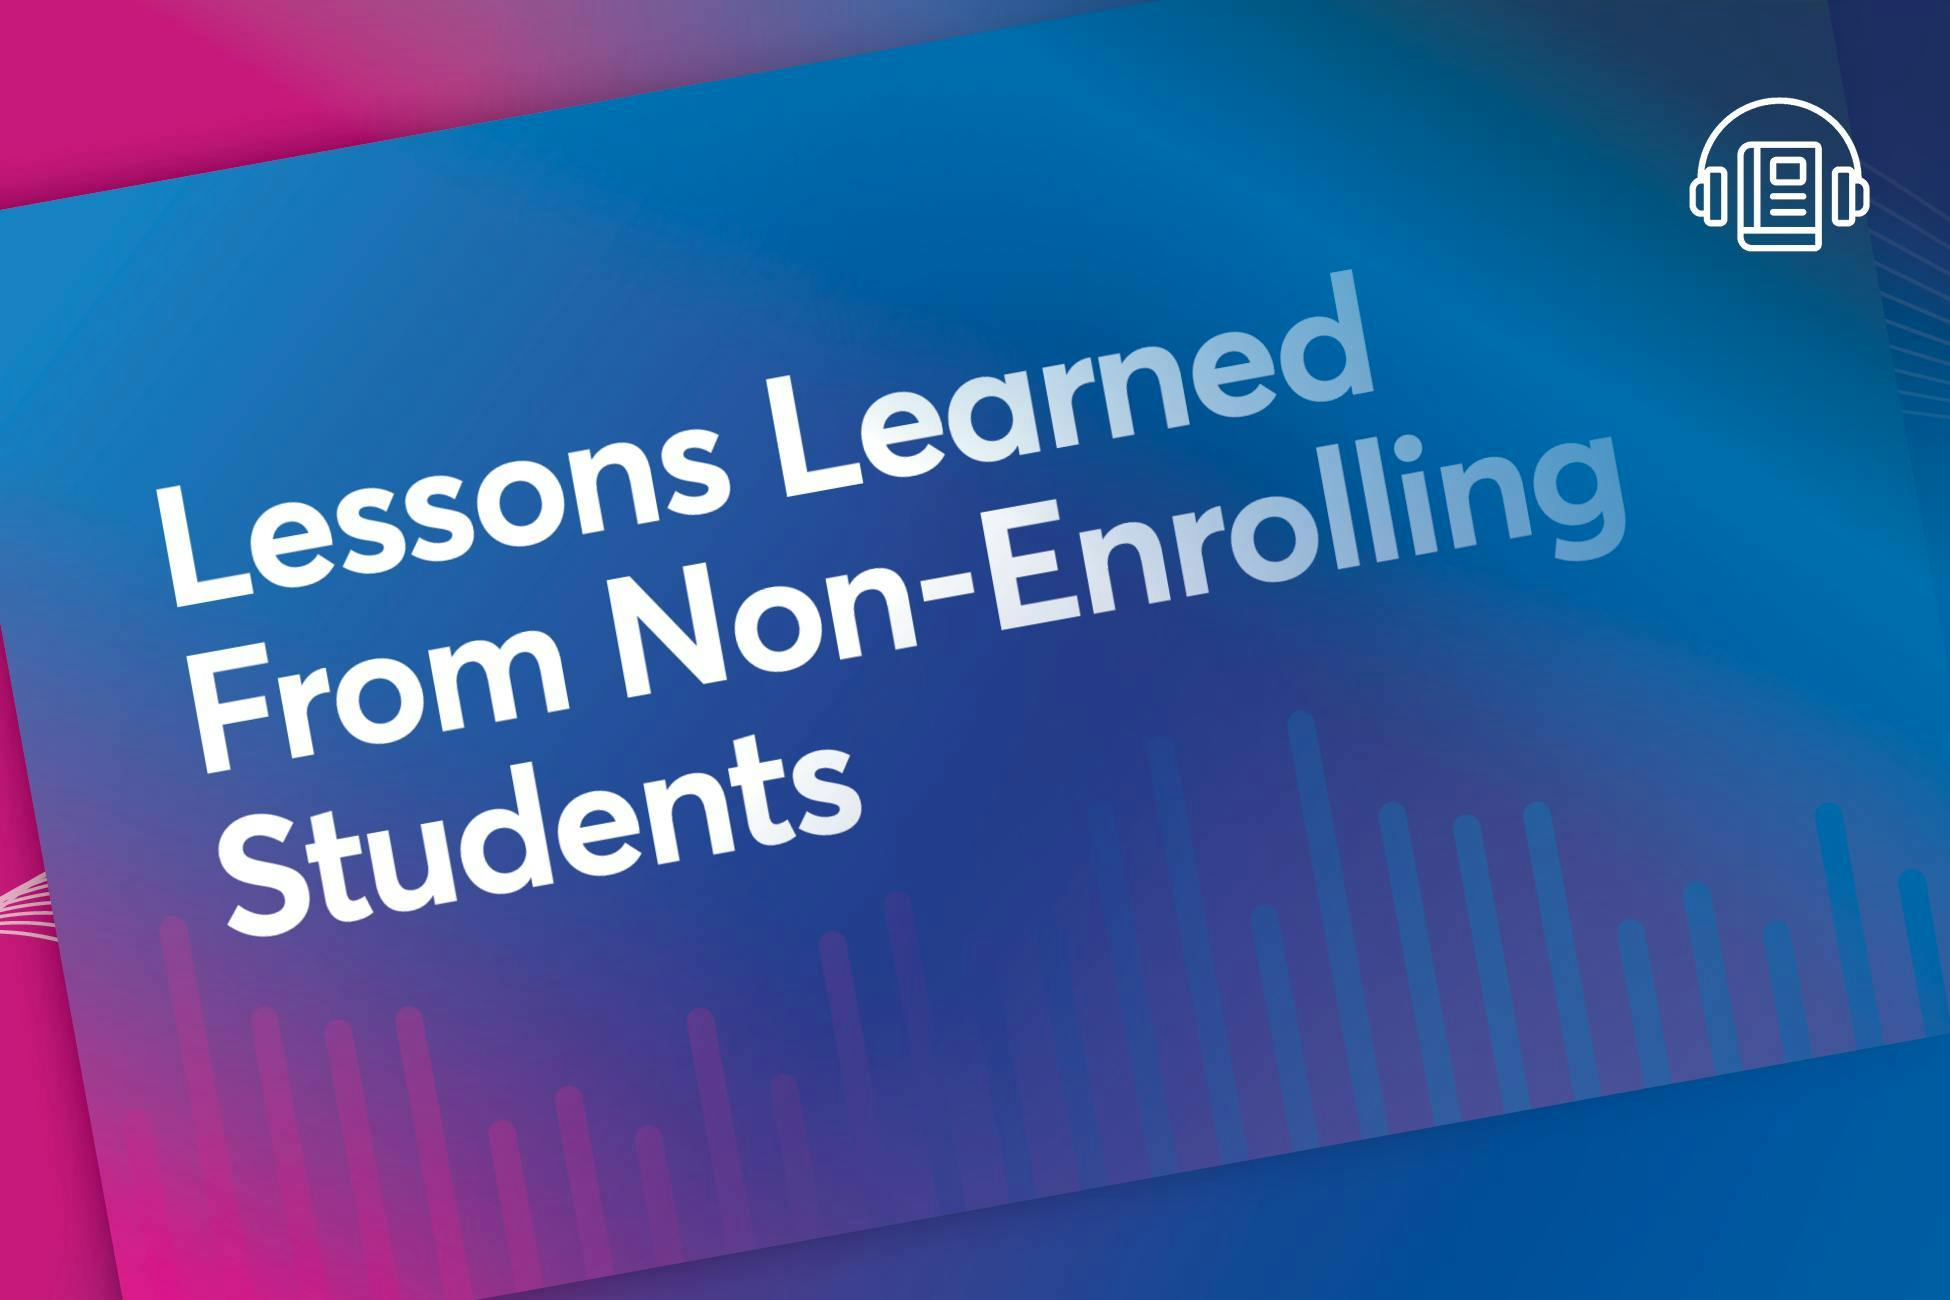 Lessons Learned From Non-Enrolling Students